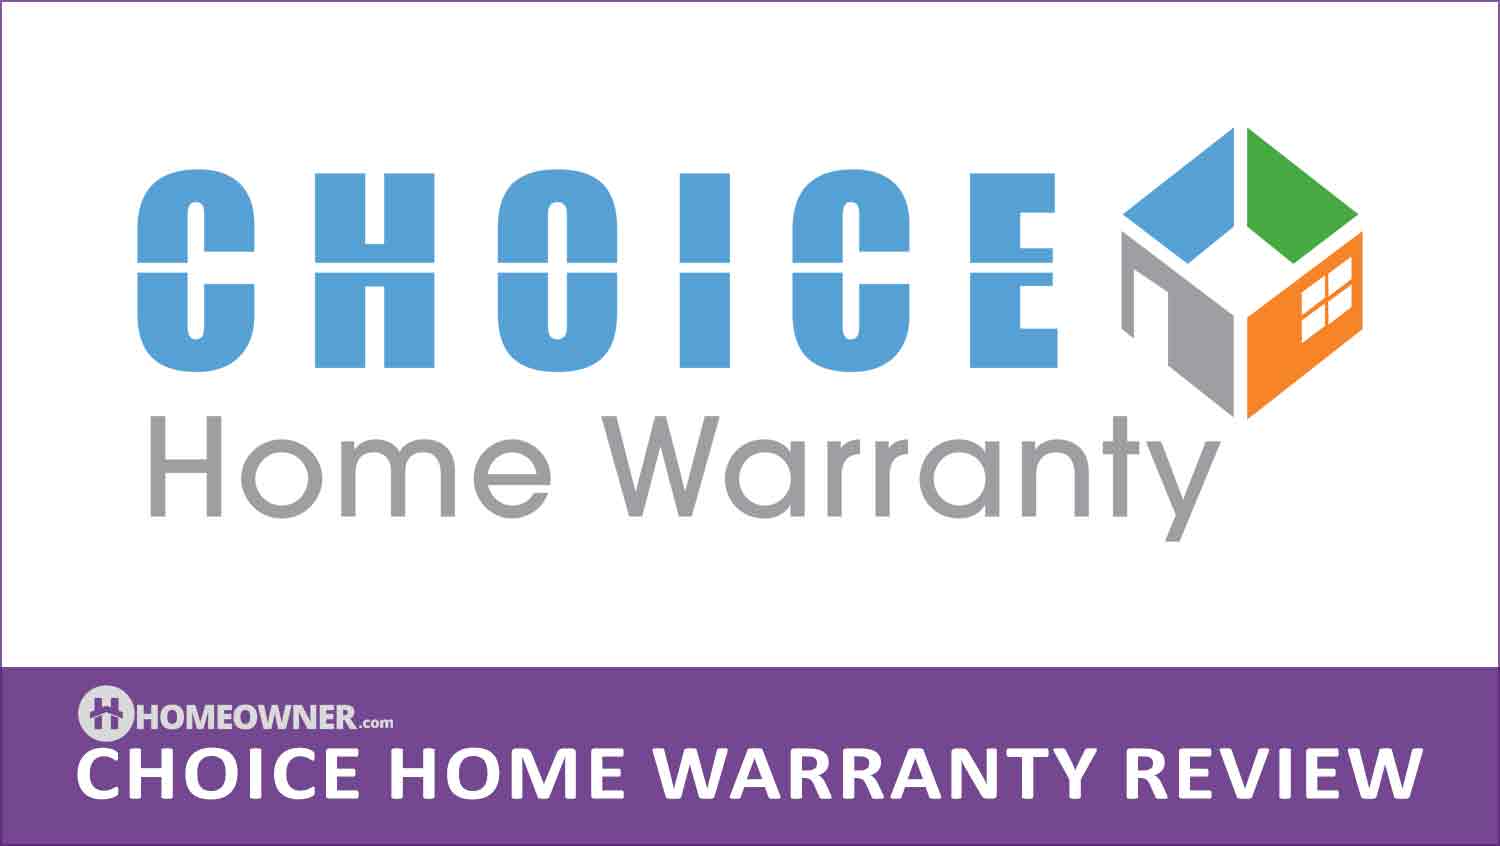 Choice Home Warranty - Plans and Coverage in 2022